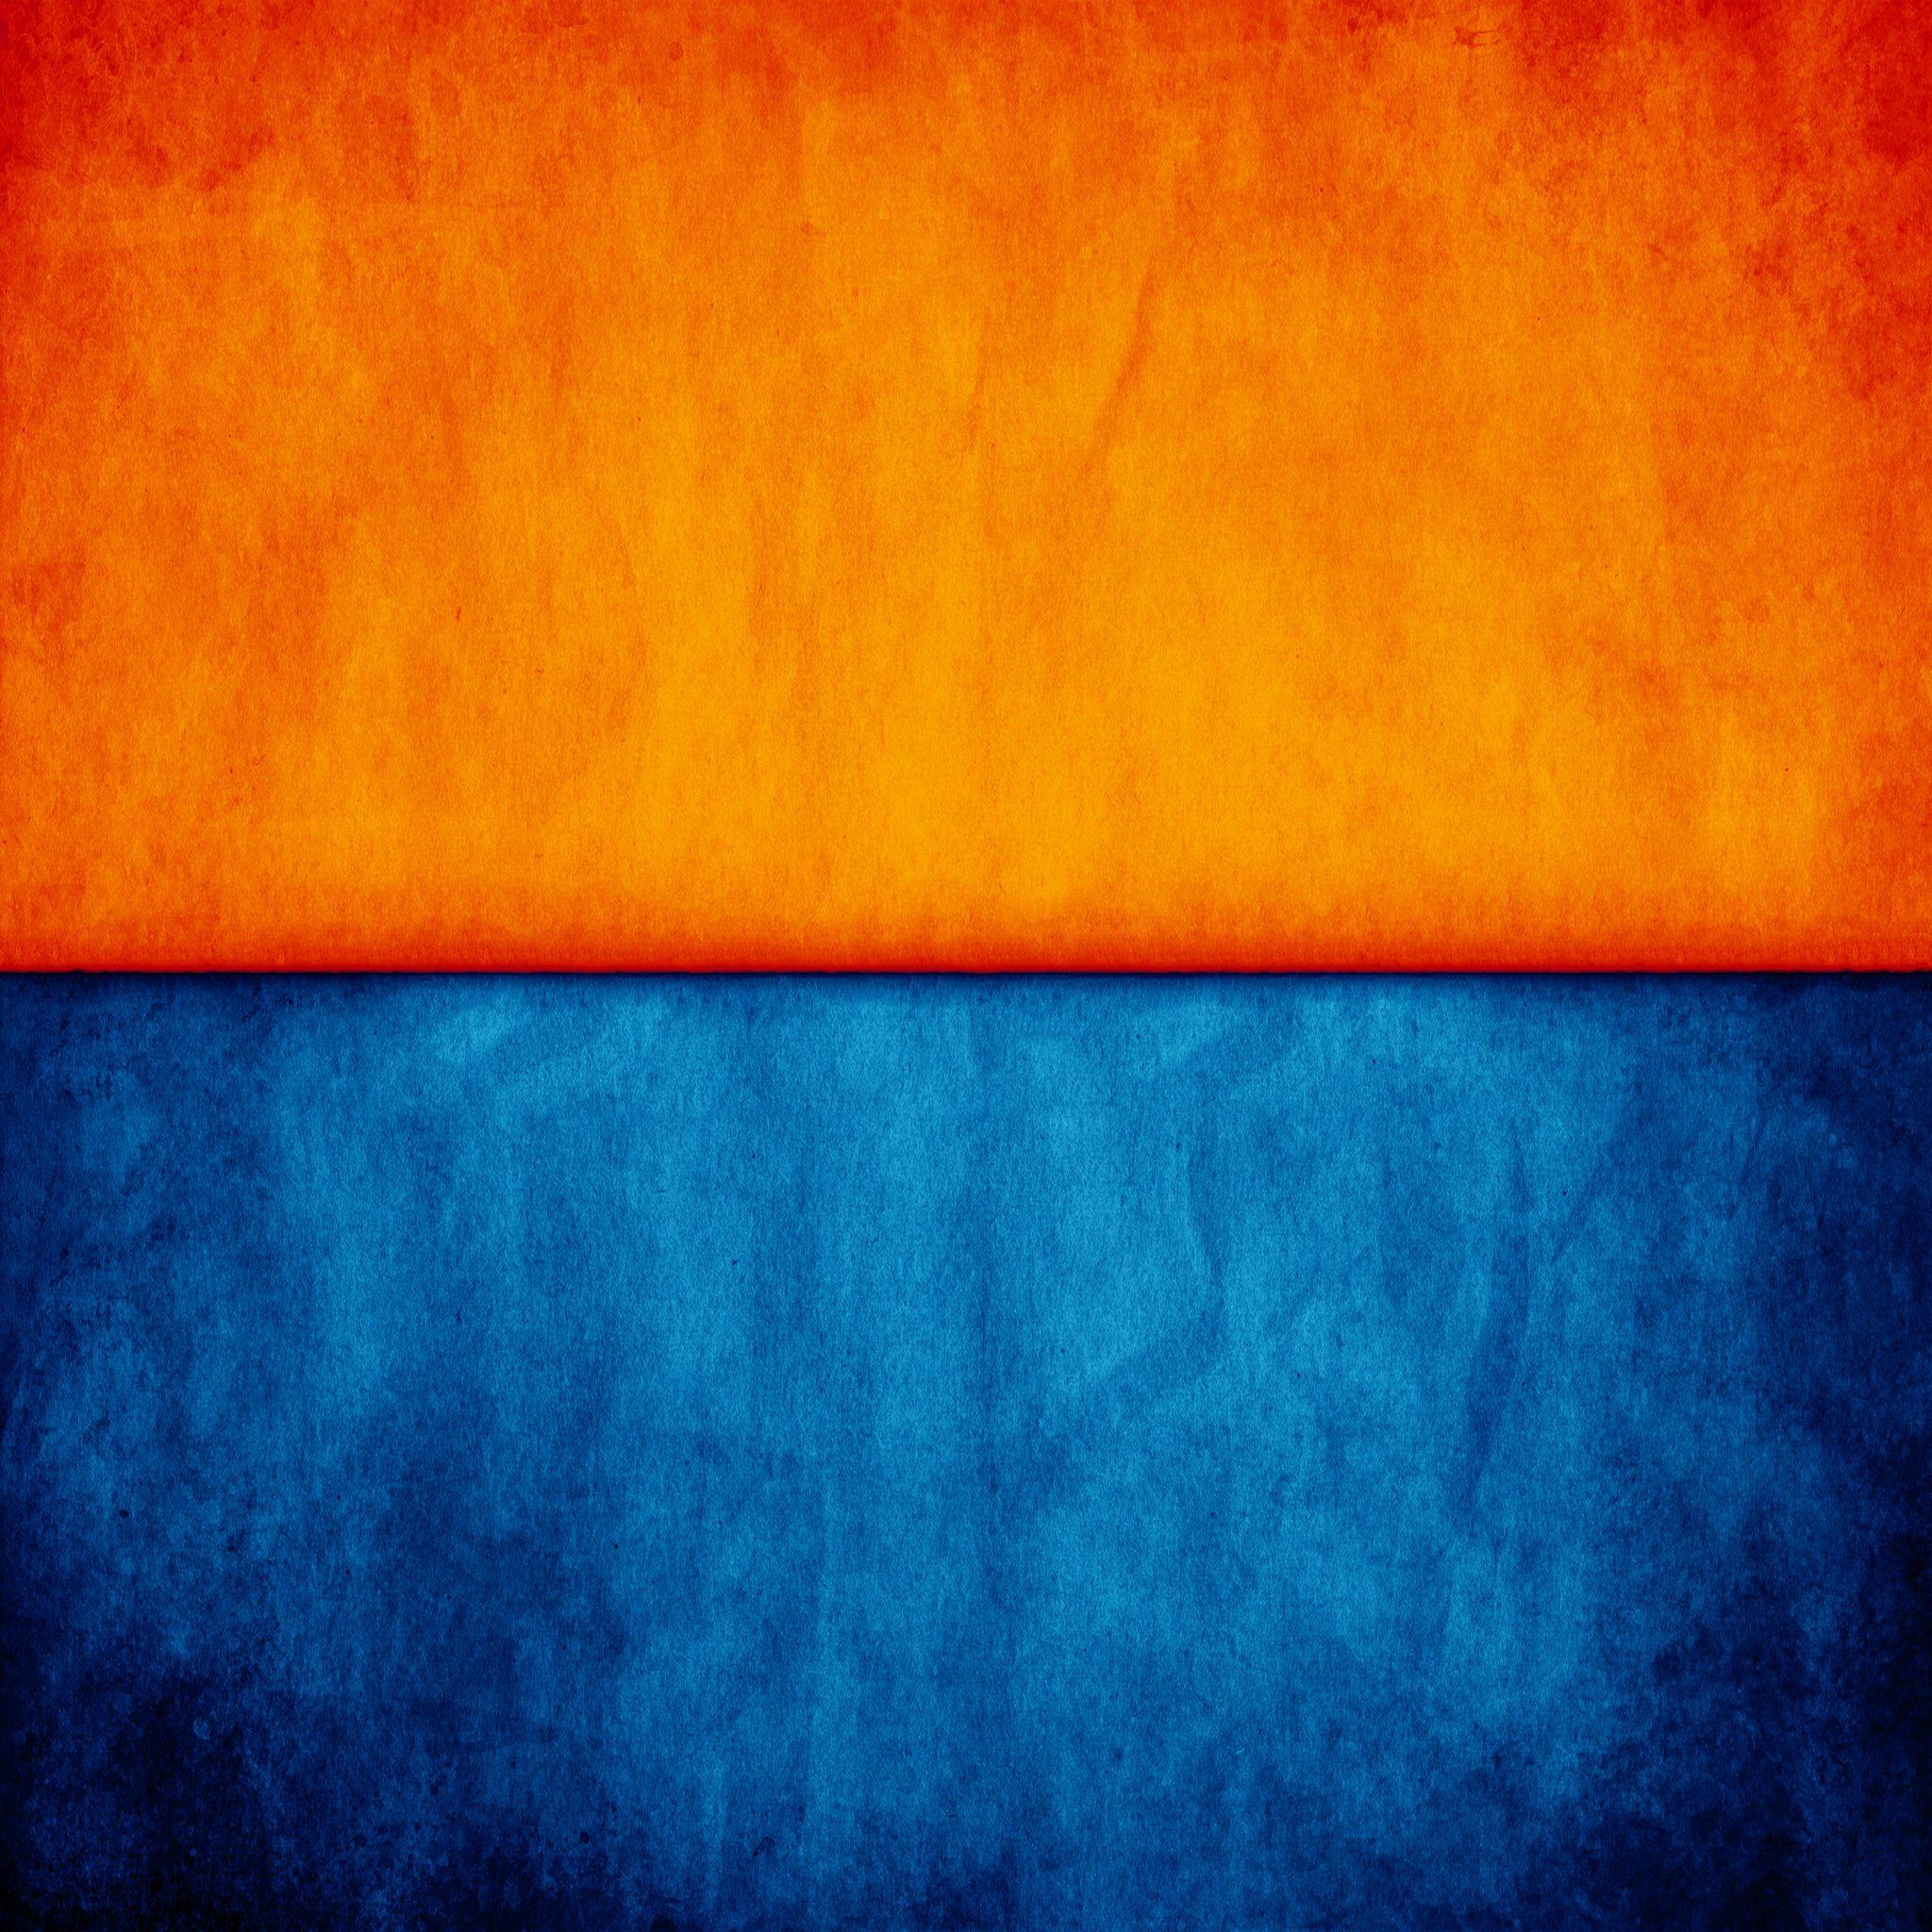 Top Blue And Orange Background Images Download Wallpapers Book Your 1 Source For Free Download Hd 4k High Quality Wallpapers